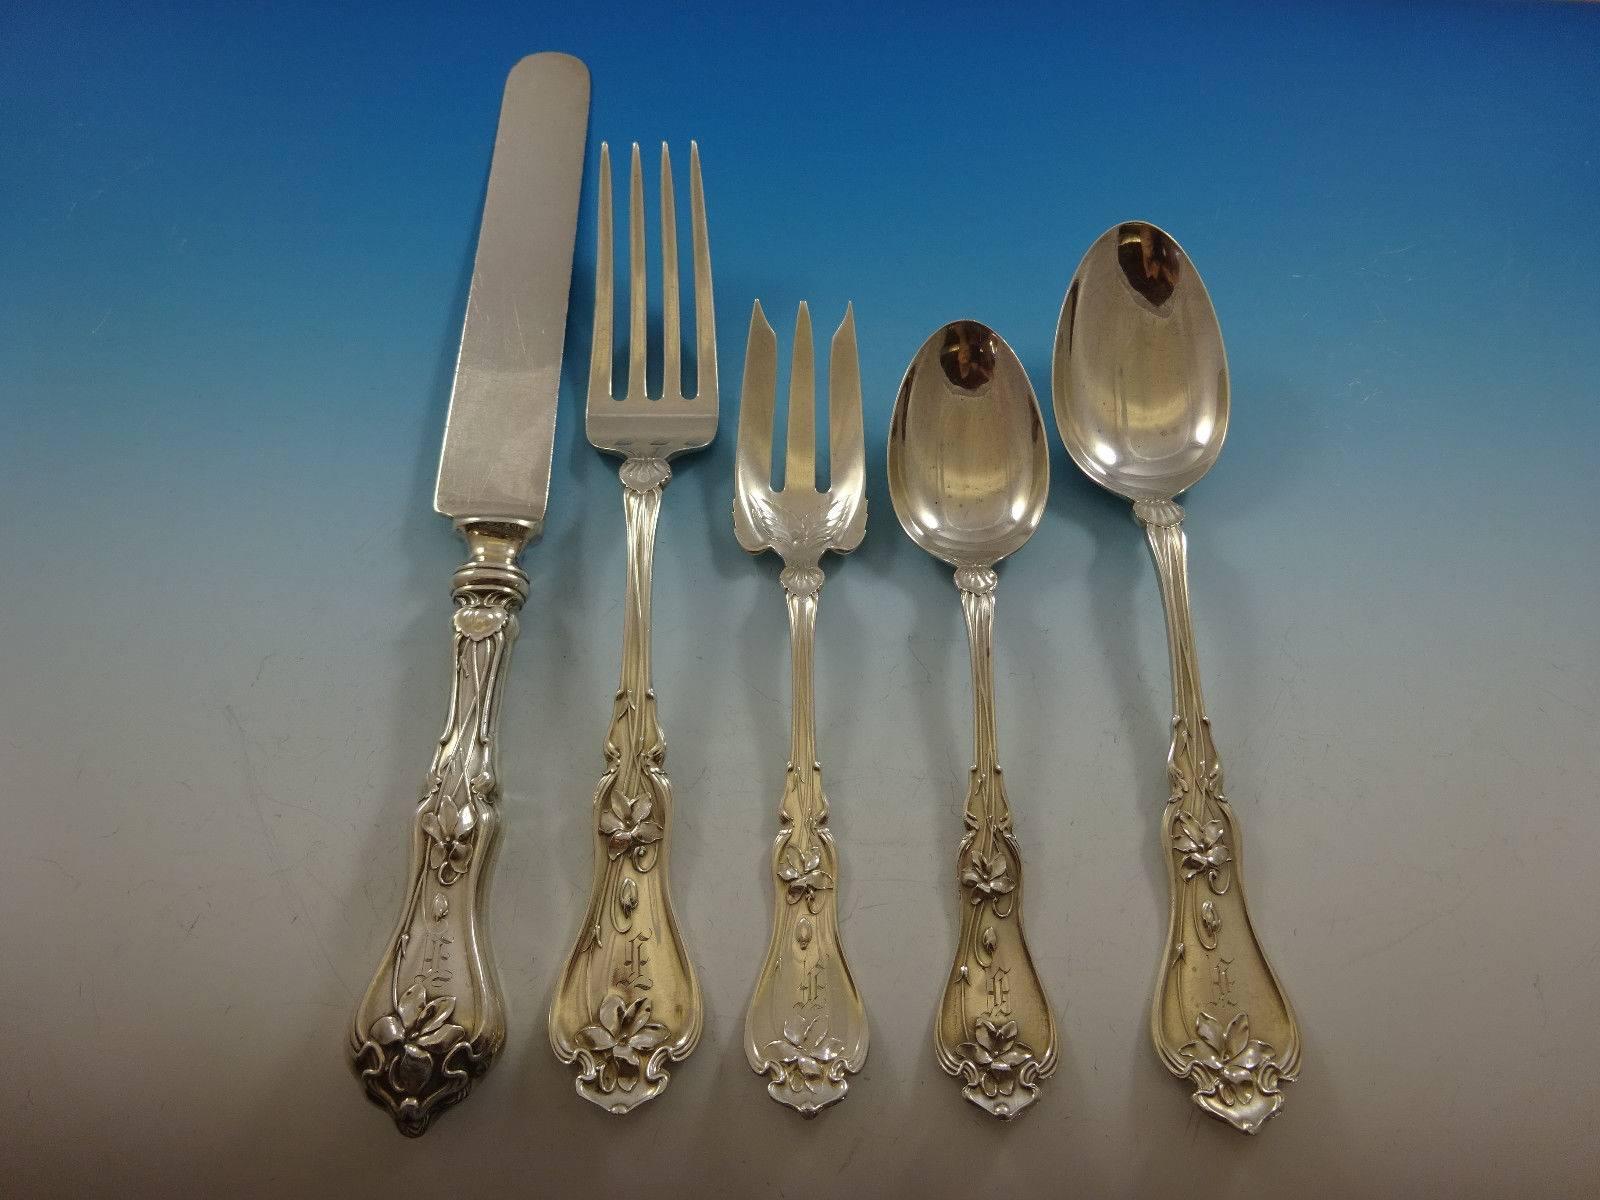 Art Nouveau Violet by Whiting, circa 1905, sterling silver dinner size flatware set 30 pieces. Great starter set! This set includes:

Six dinner size knives, 9 1/2